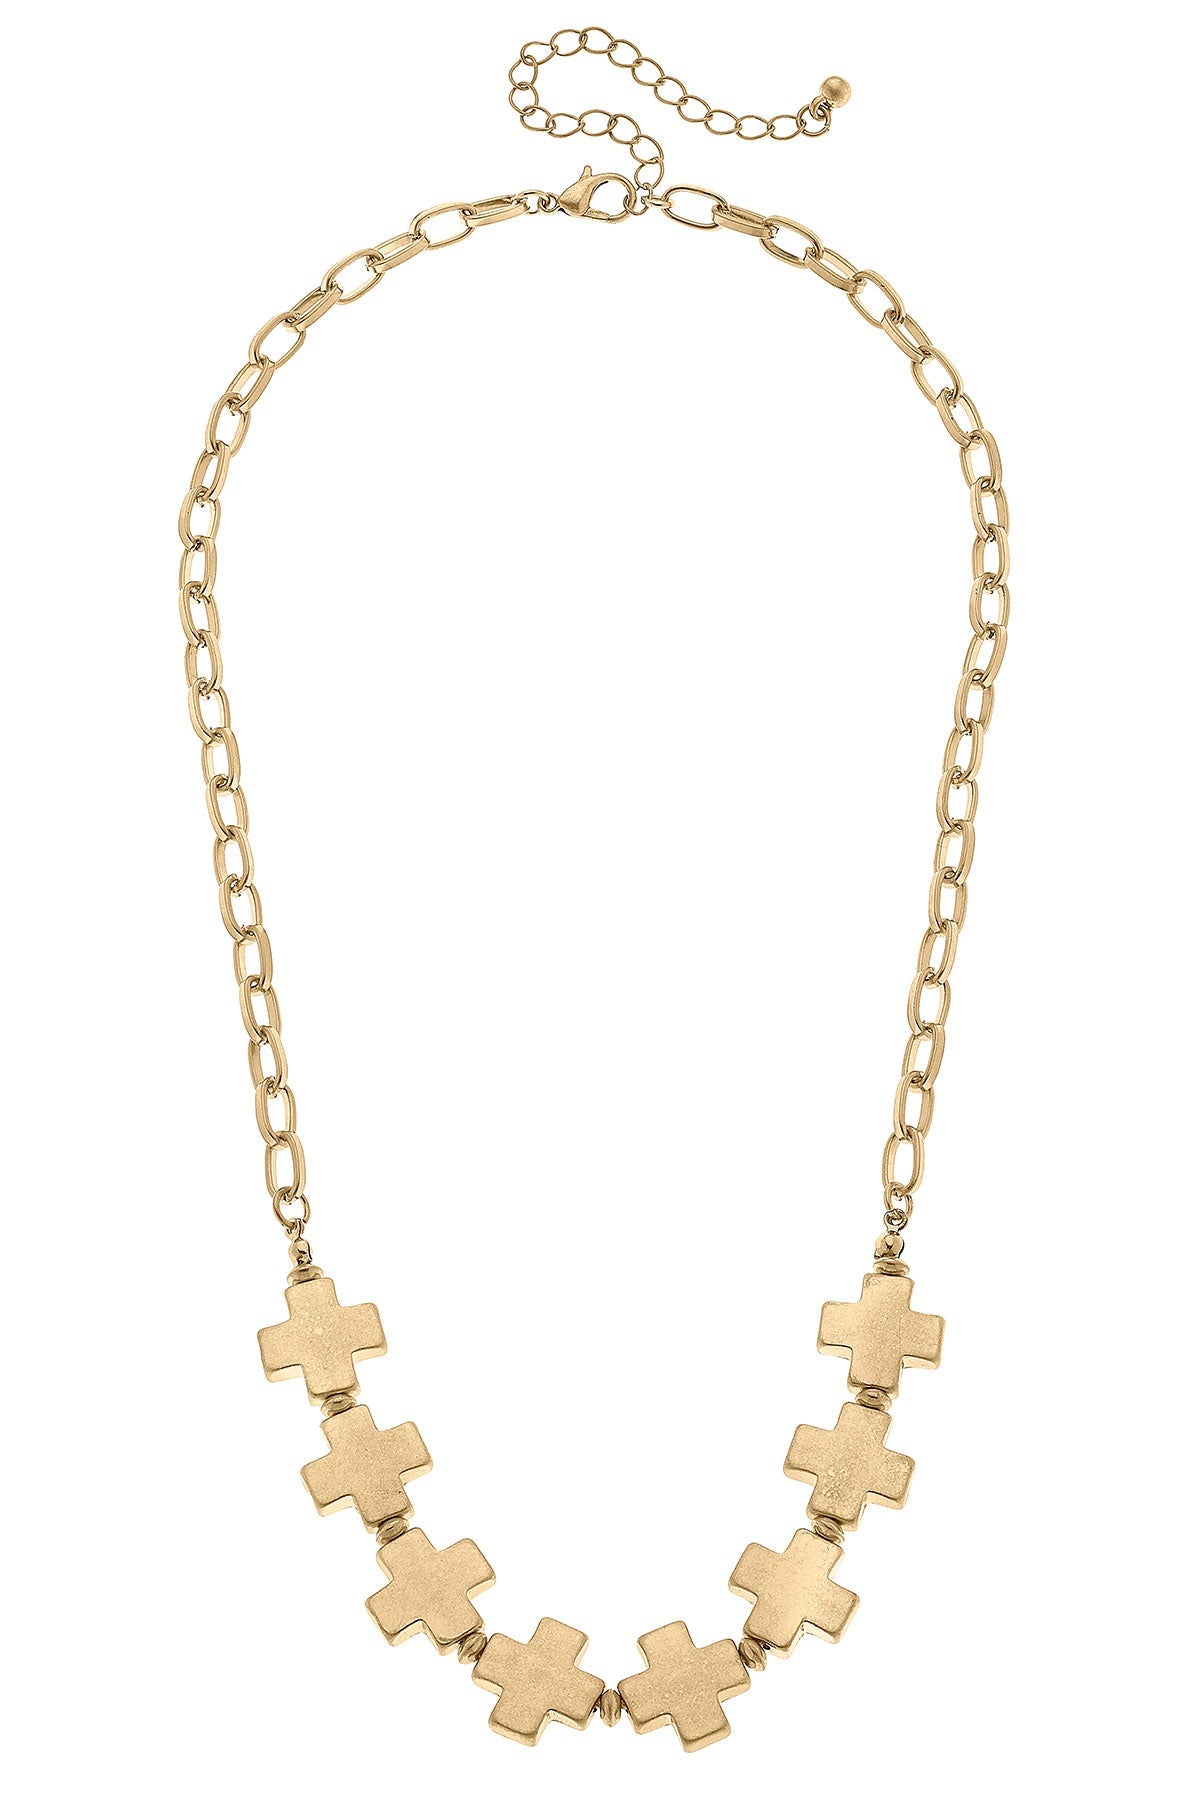 Edith Square Cross Chain Link Necklace in Worn Gold by CANVAS